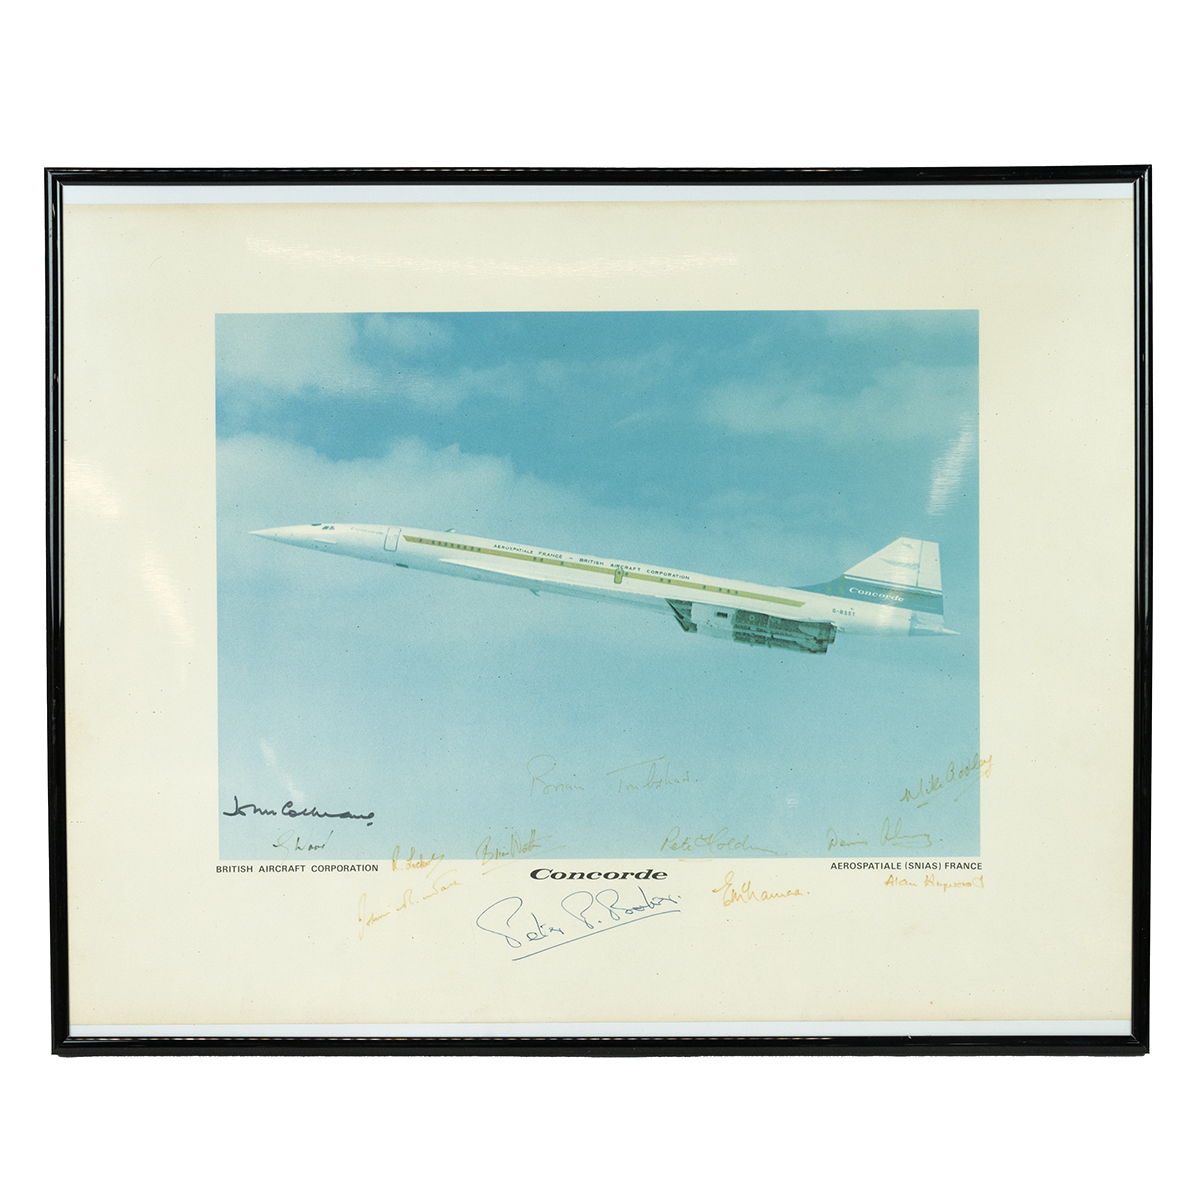 Concorde Interest. 1970s framed and autographed photographic print of a Concorde test plane G-BSS...